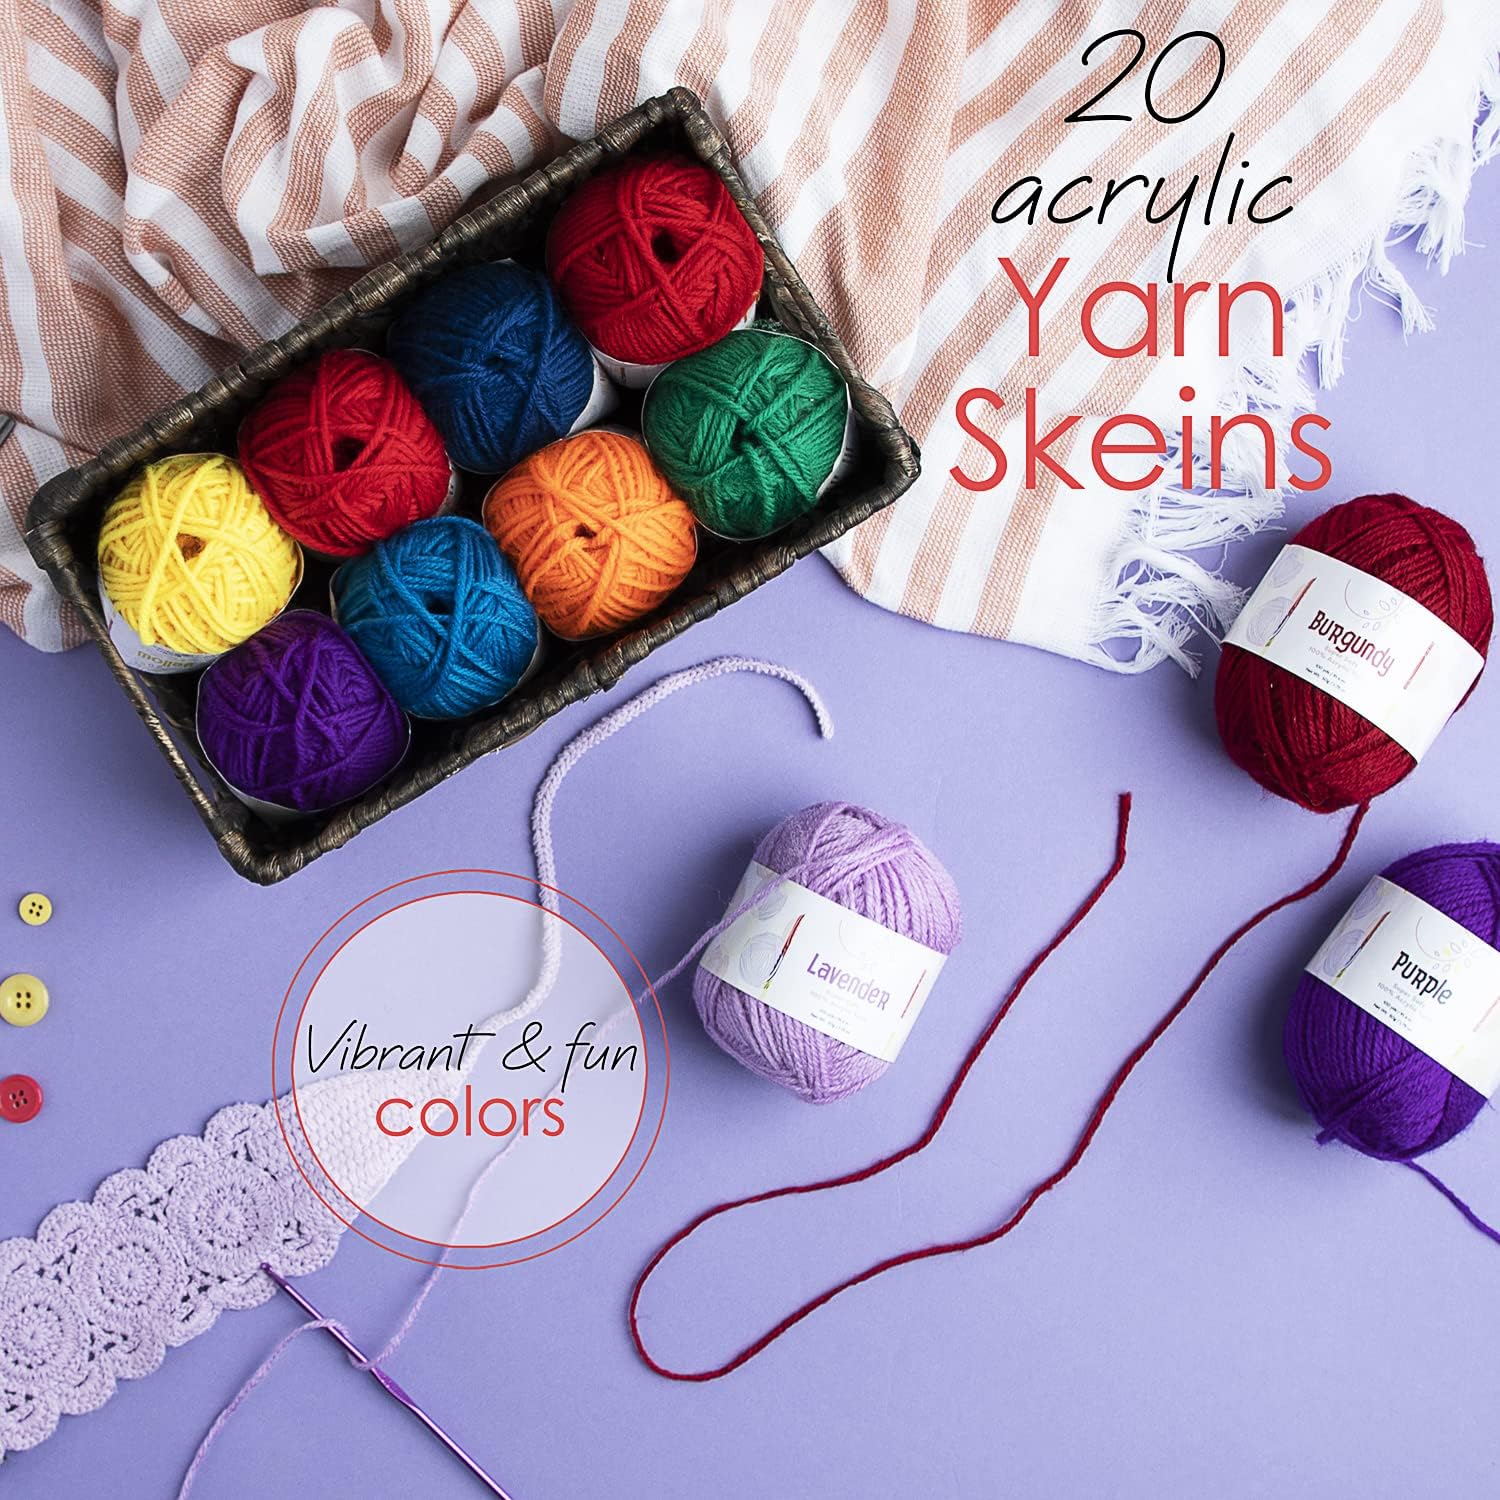 Hearth & Harbor Crochet Kit with Crochet Hooks Yarn Set 73 Piece - Premium  Bundle Includes Yarn Balls, Needles, Accessories Kit, Canvas Tote Bag -  Starter Pack for Kids Adults, Beginner, Professionals 